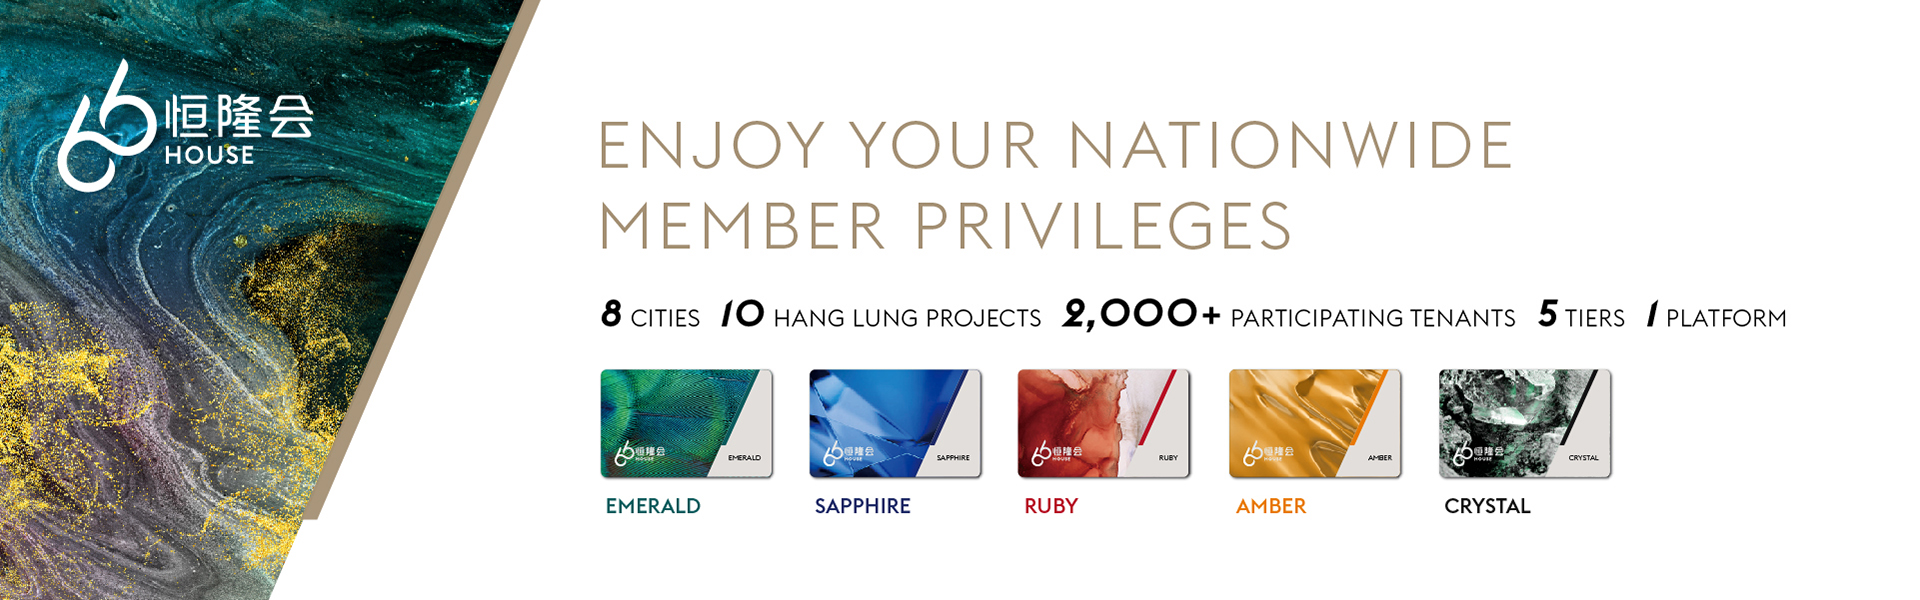 HOUSE 66 - Enjoy your nationwide member privileges